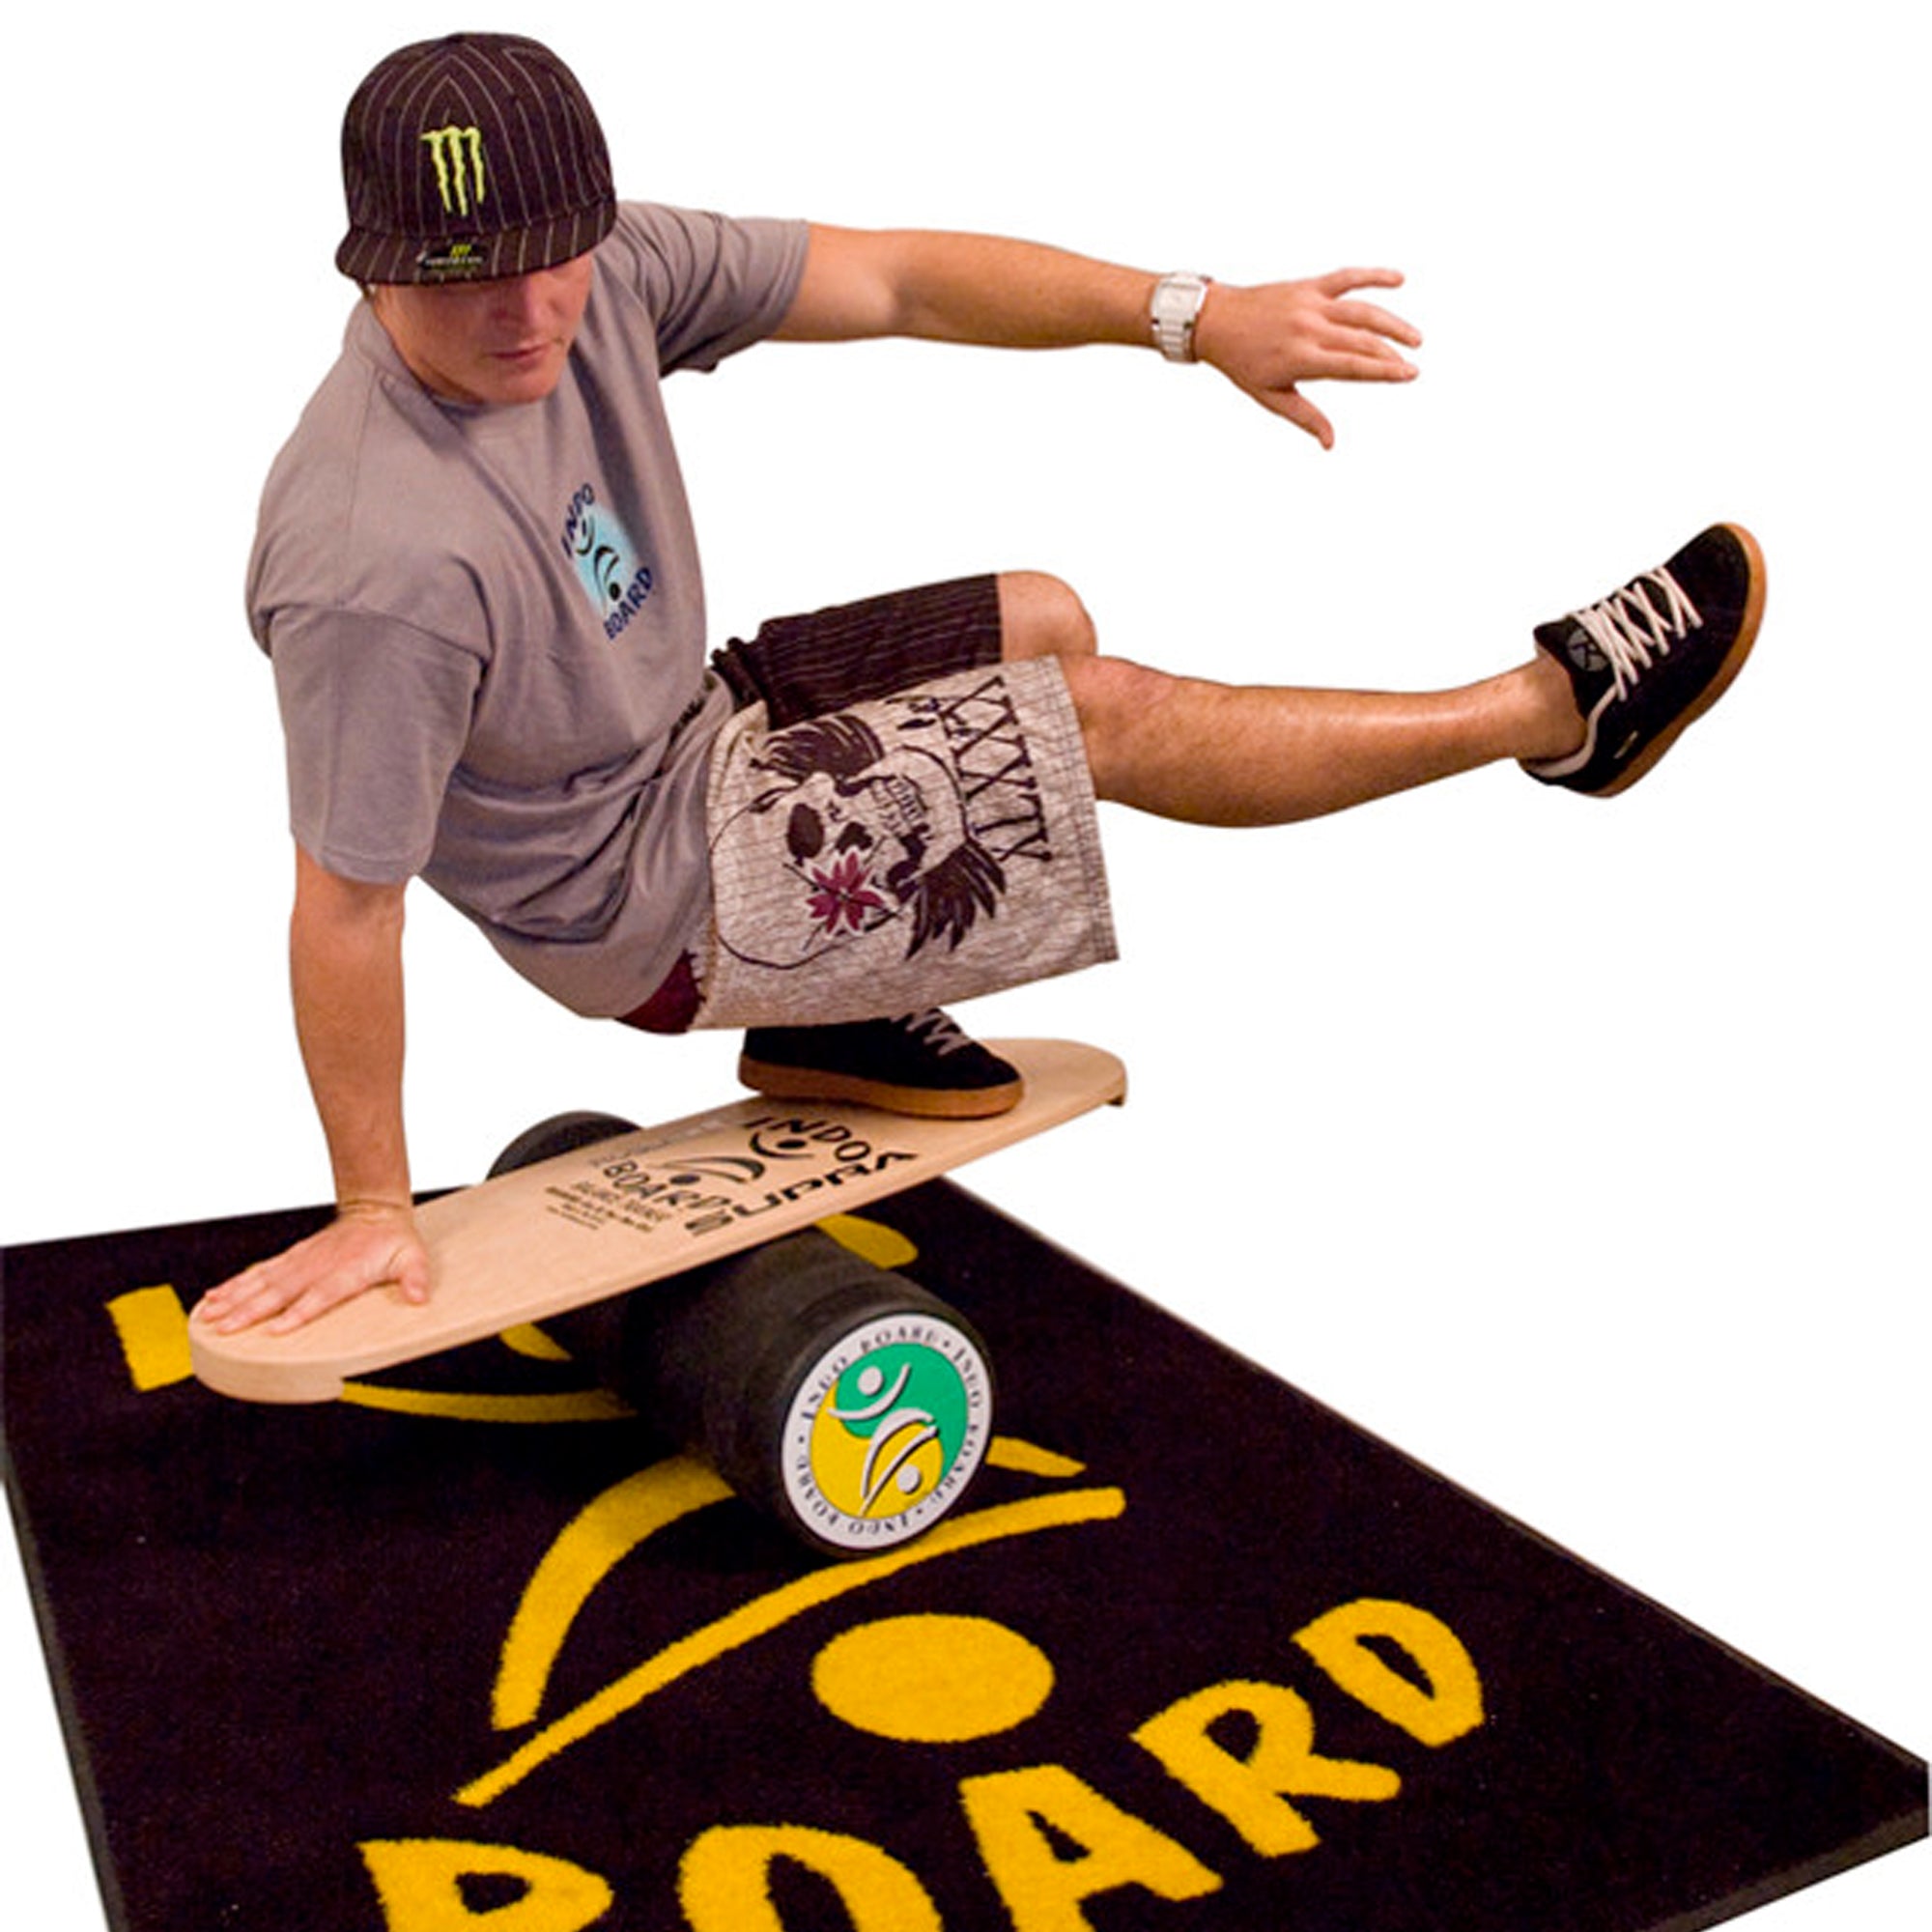 Indo Board Mini Pro Deck and Roller Kit